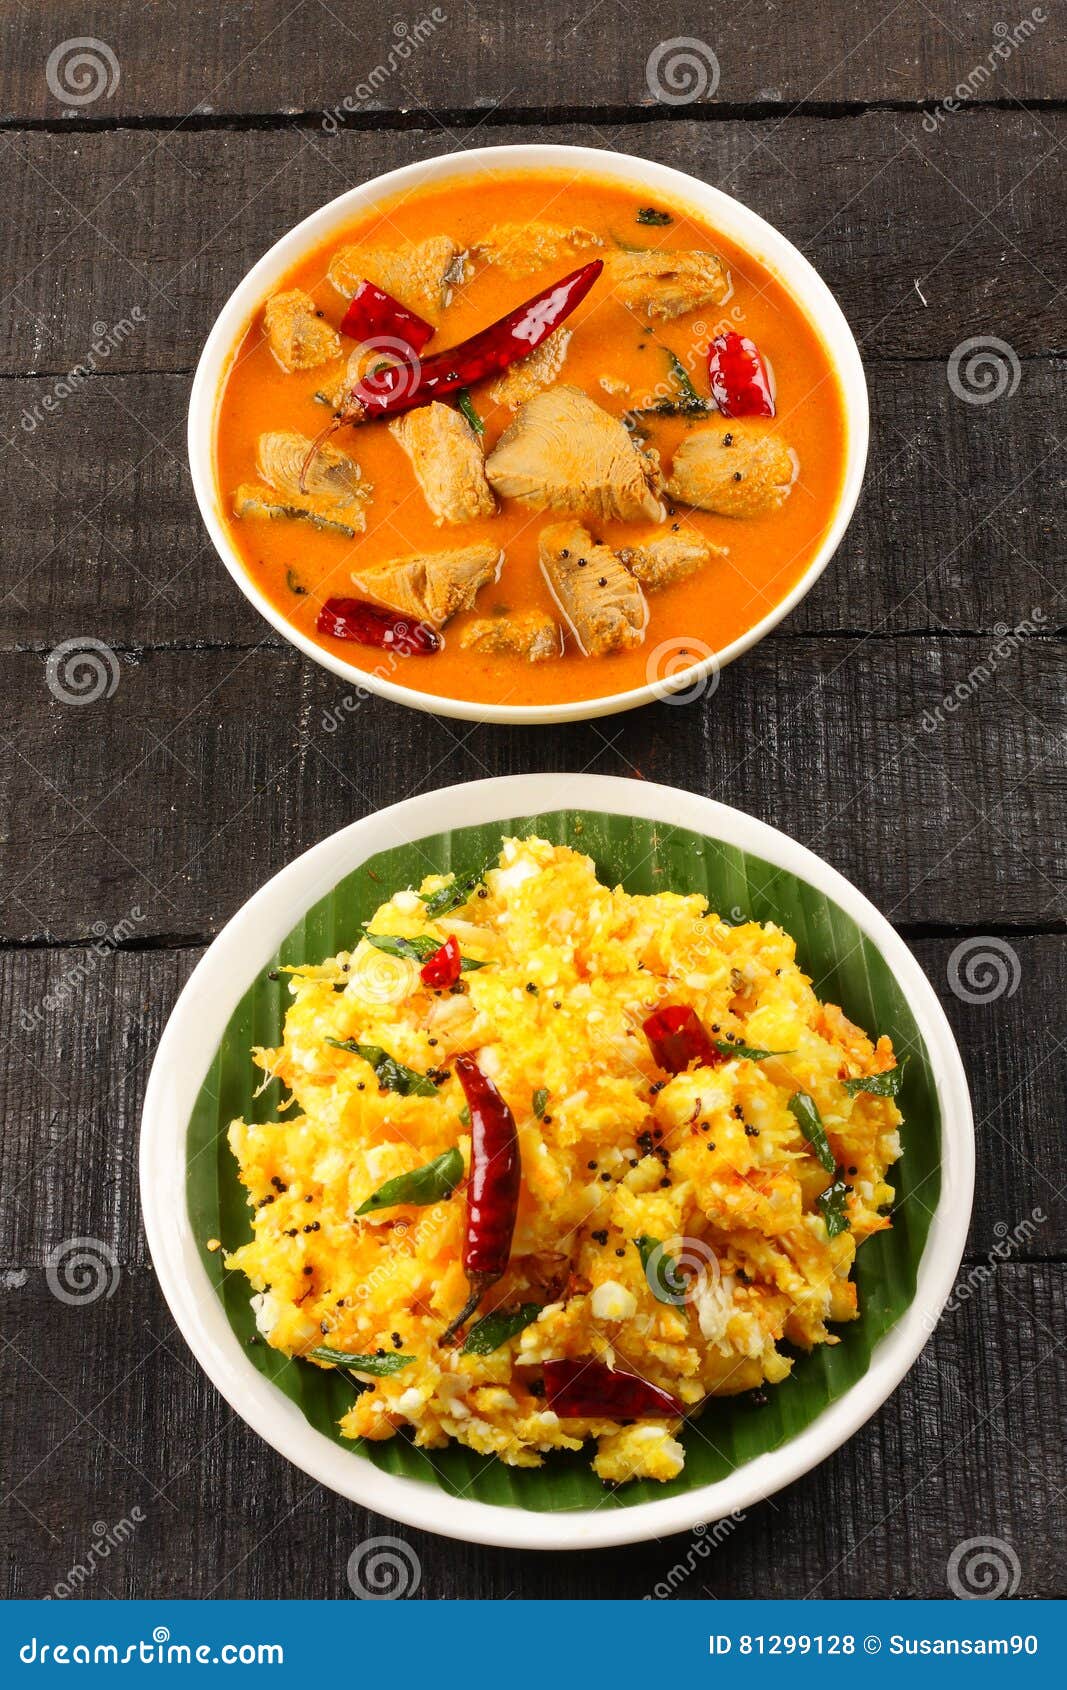 Kerala Food Tapioca Served with Fish Curry, Stock Photo - Image of ...